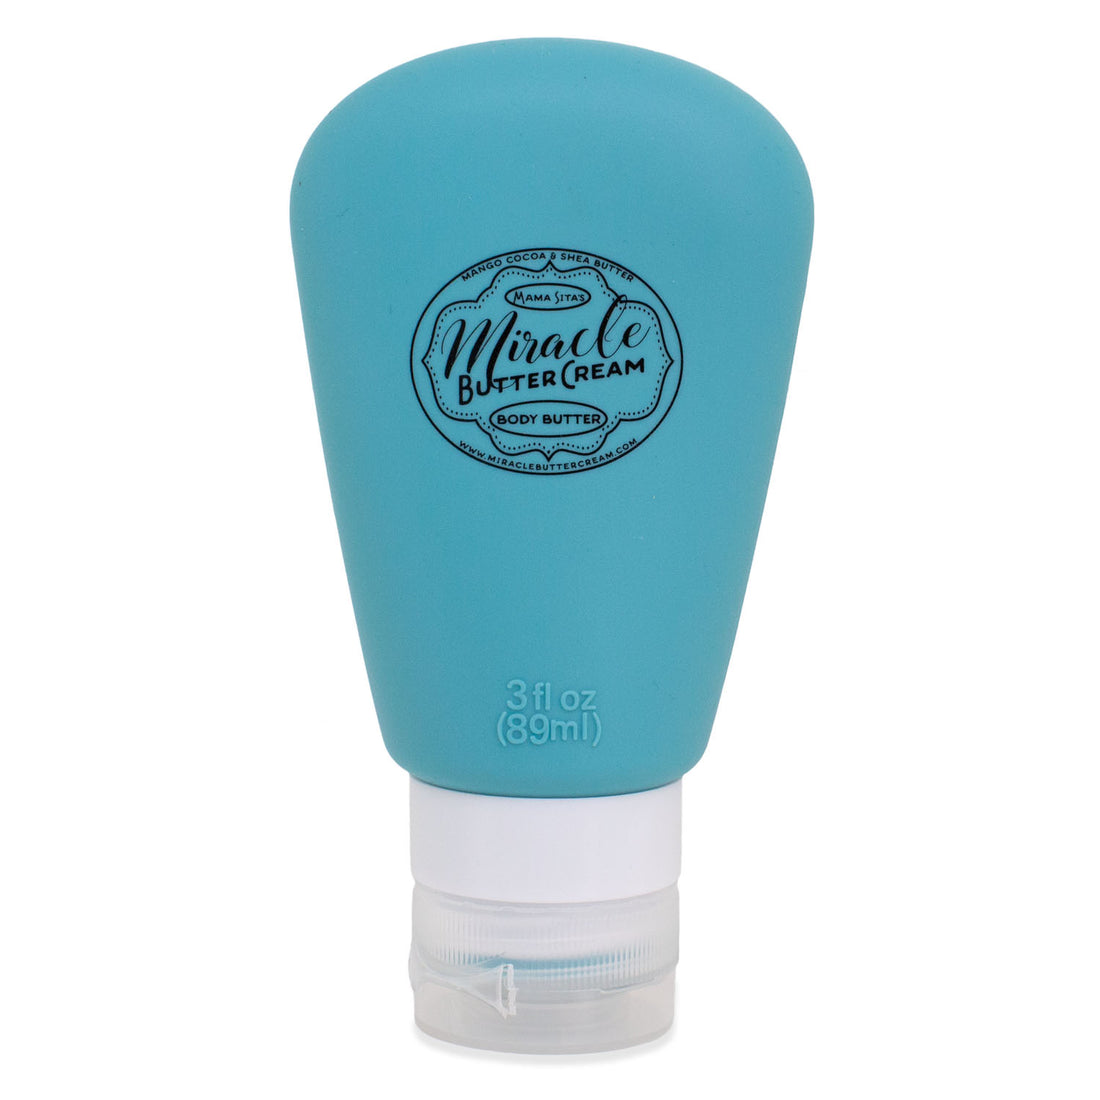 Miracle Butter Cream Squeeze Tube 3oz turquoise, miraclebuttercream.com